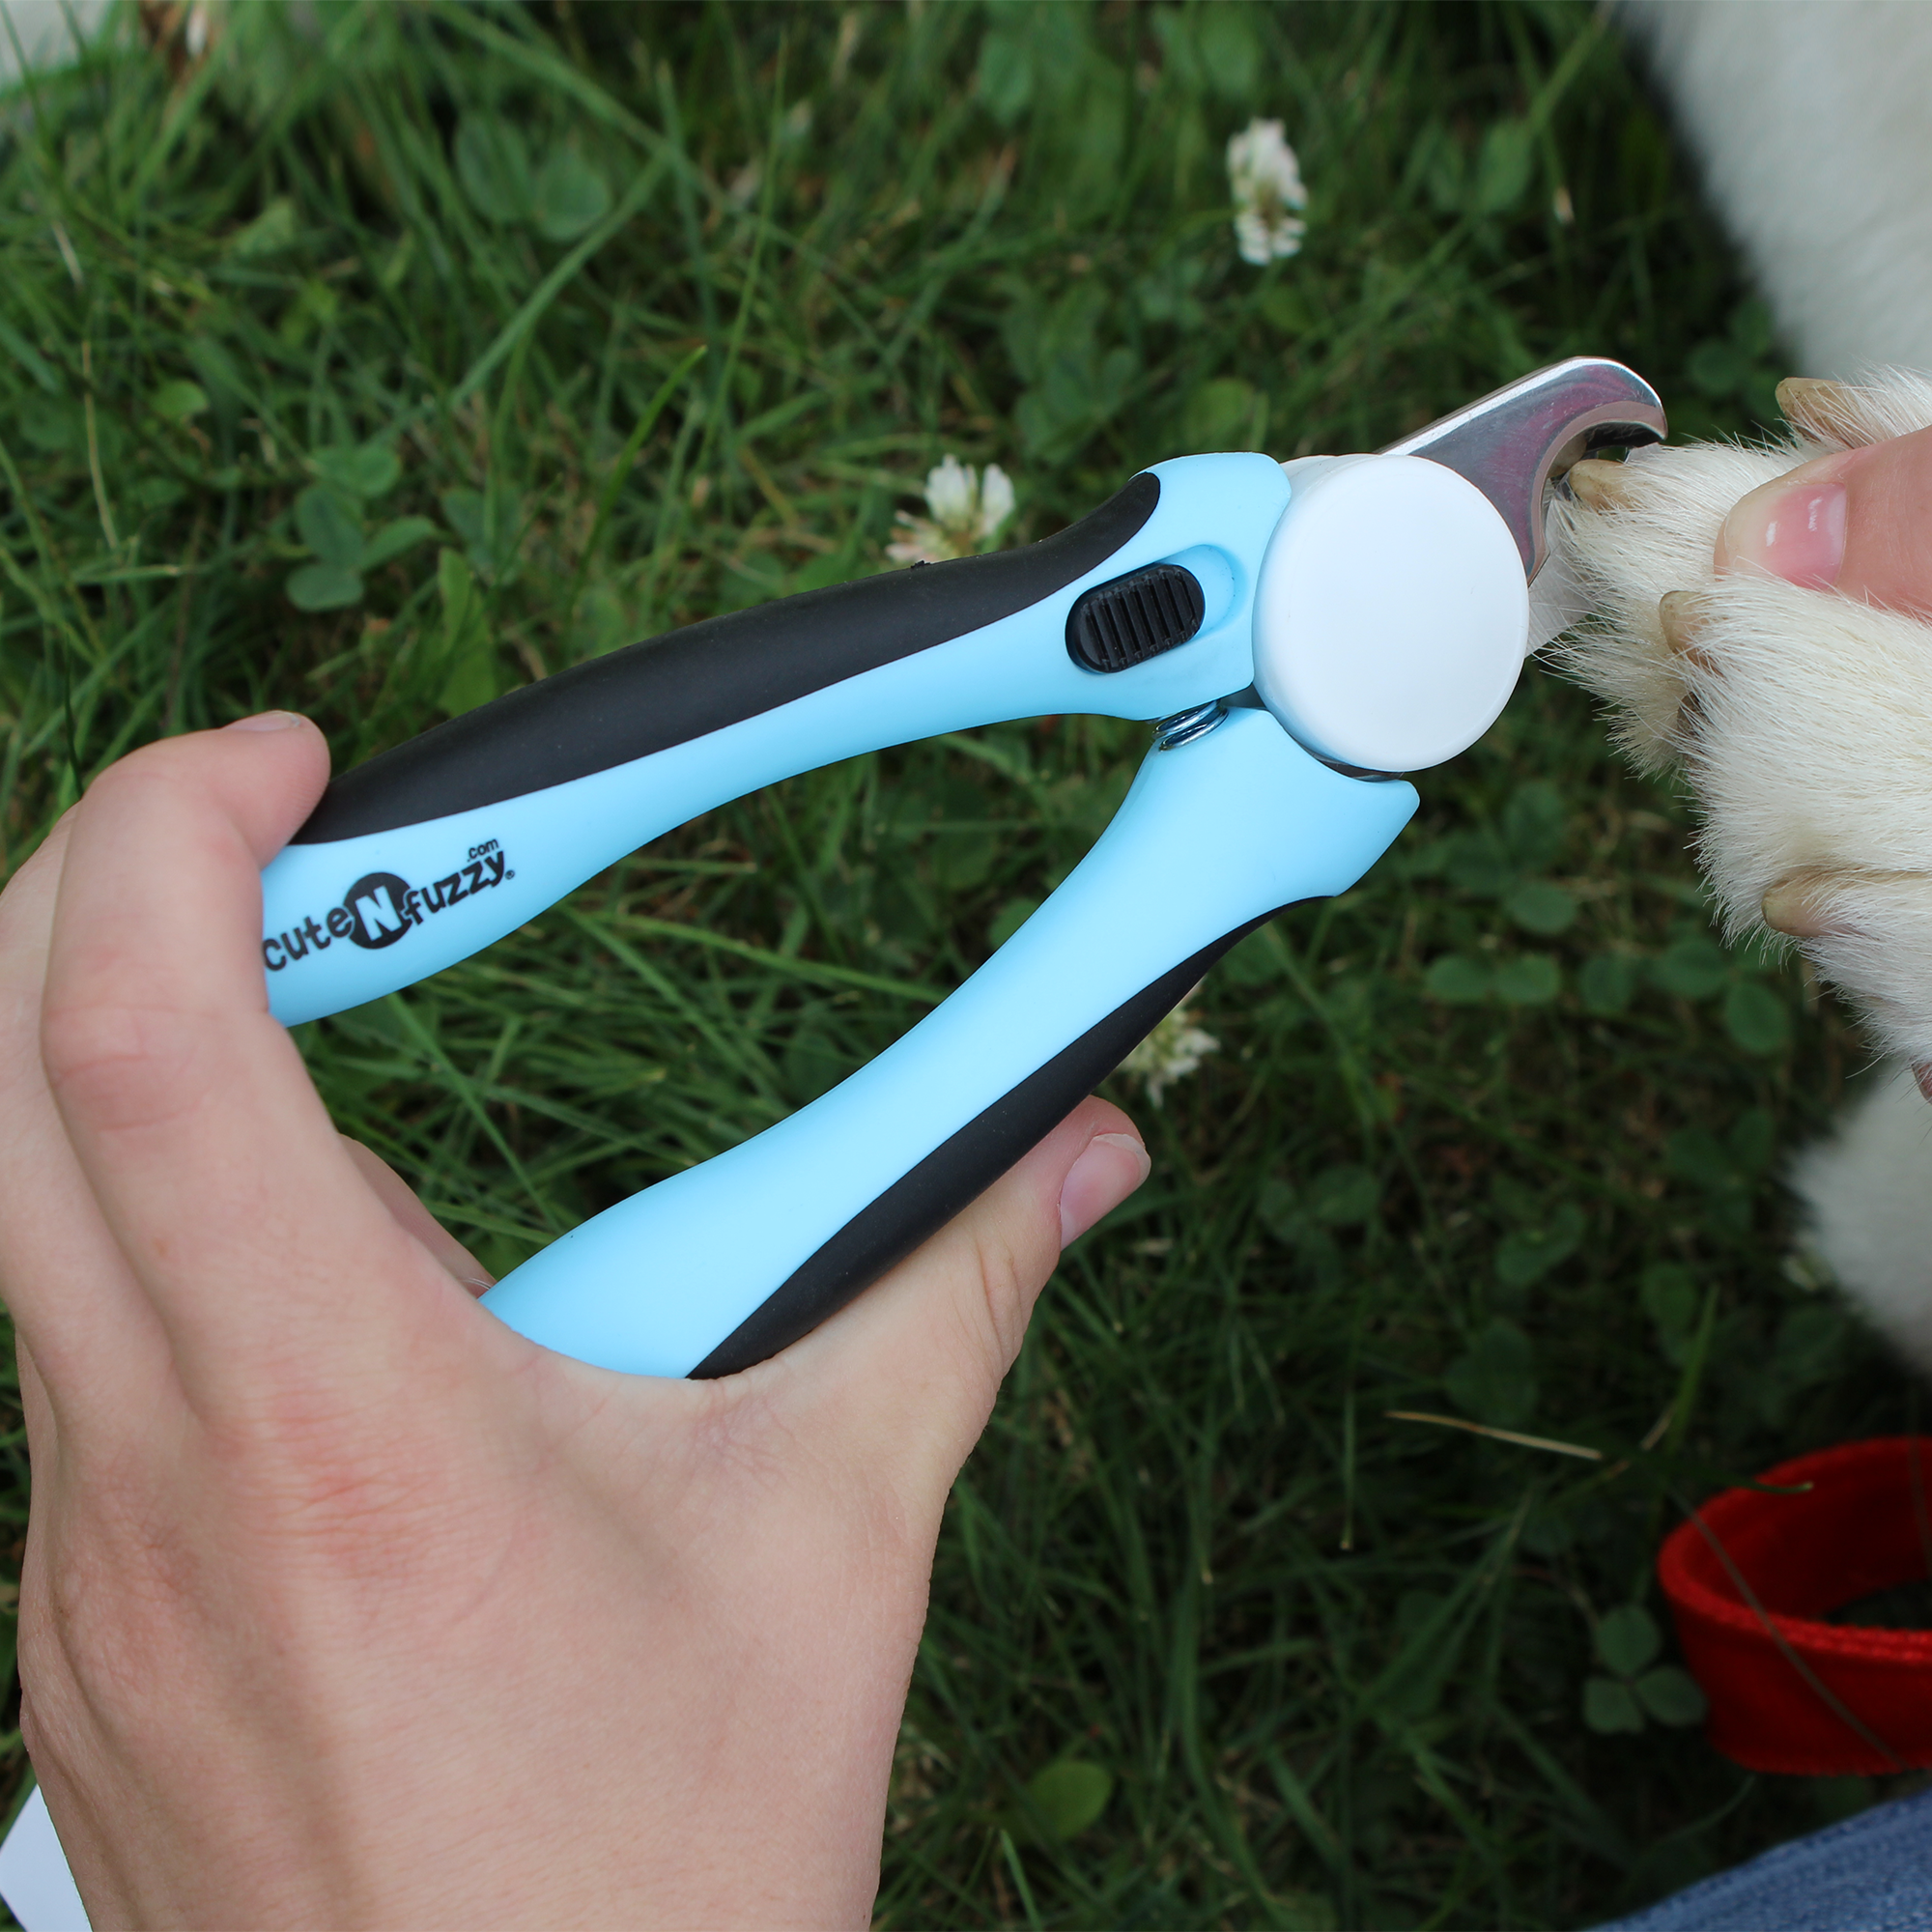 1 Best Selling Dog & Cat Nail Clippers Trimmers Review Gonicc Brand -  YouTube